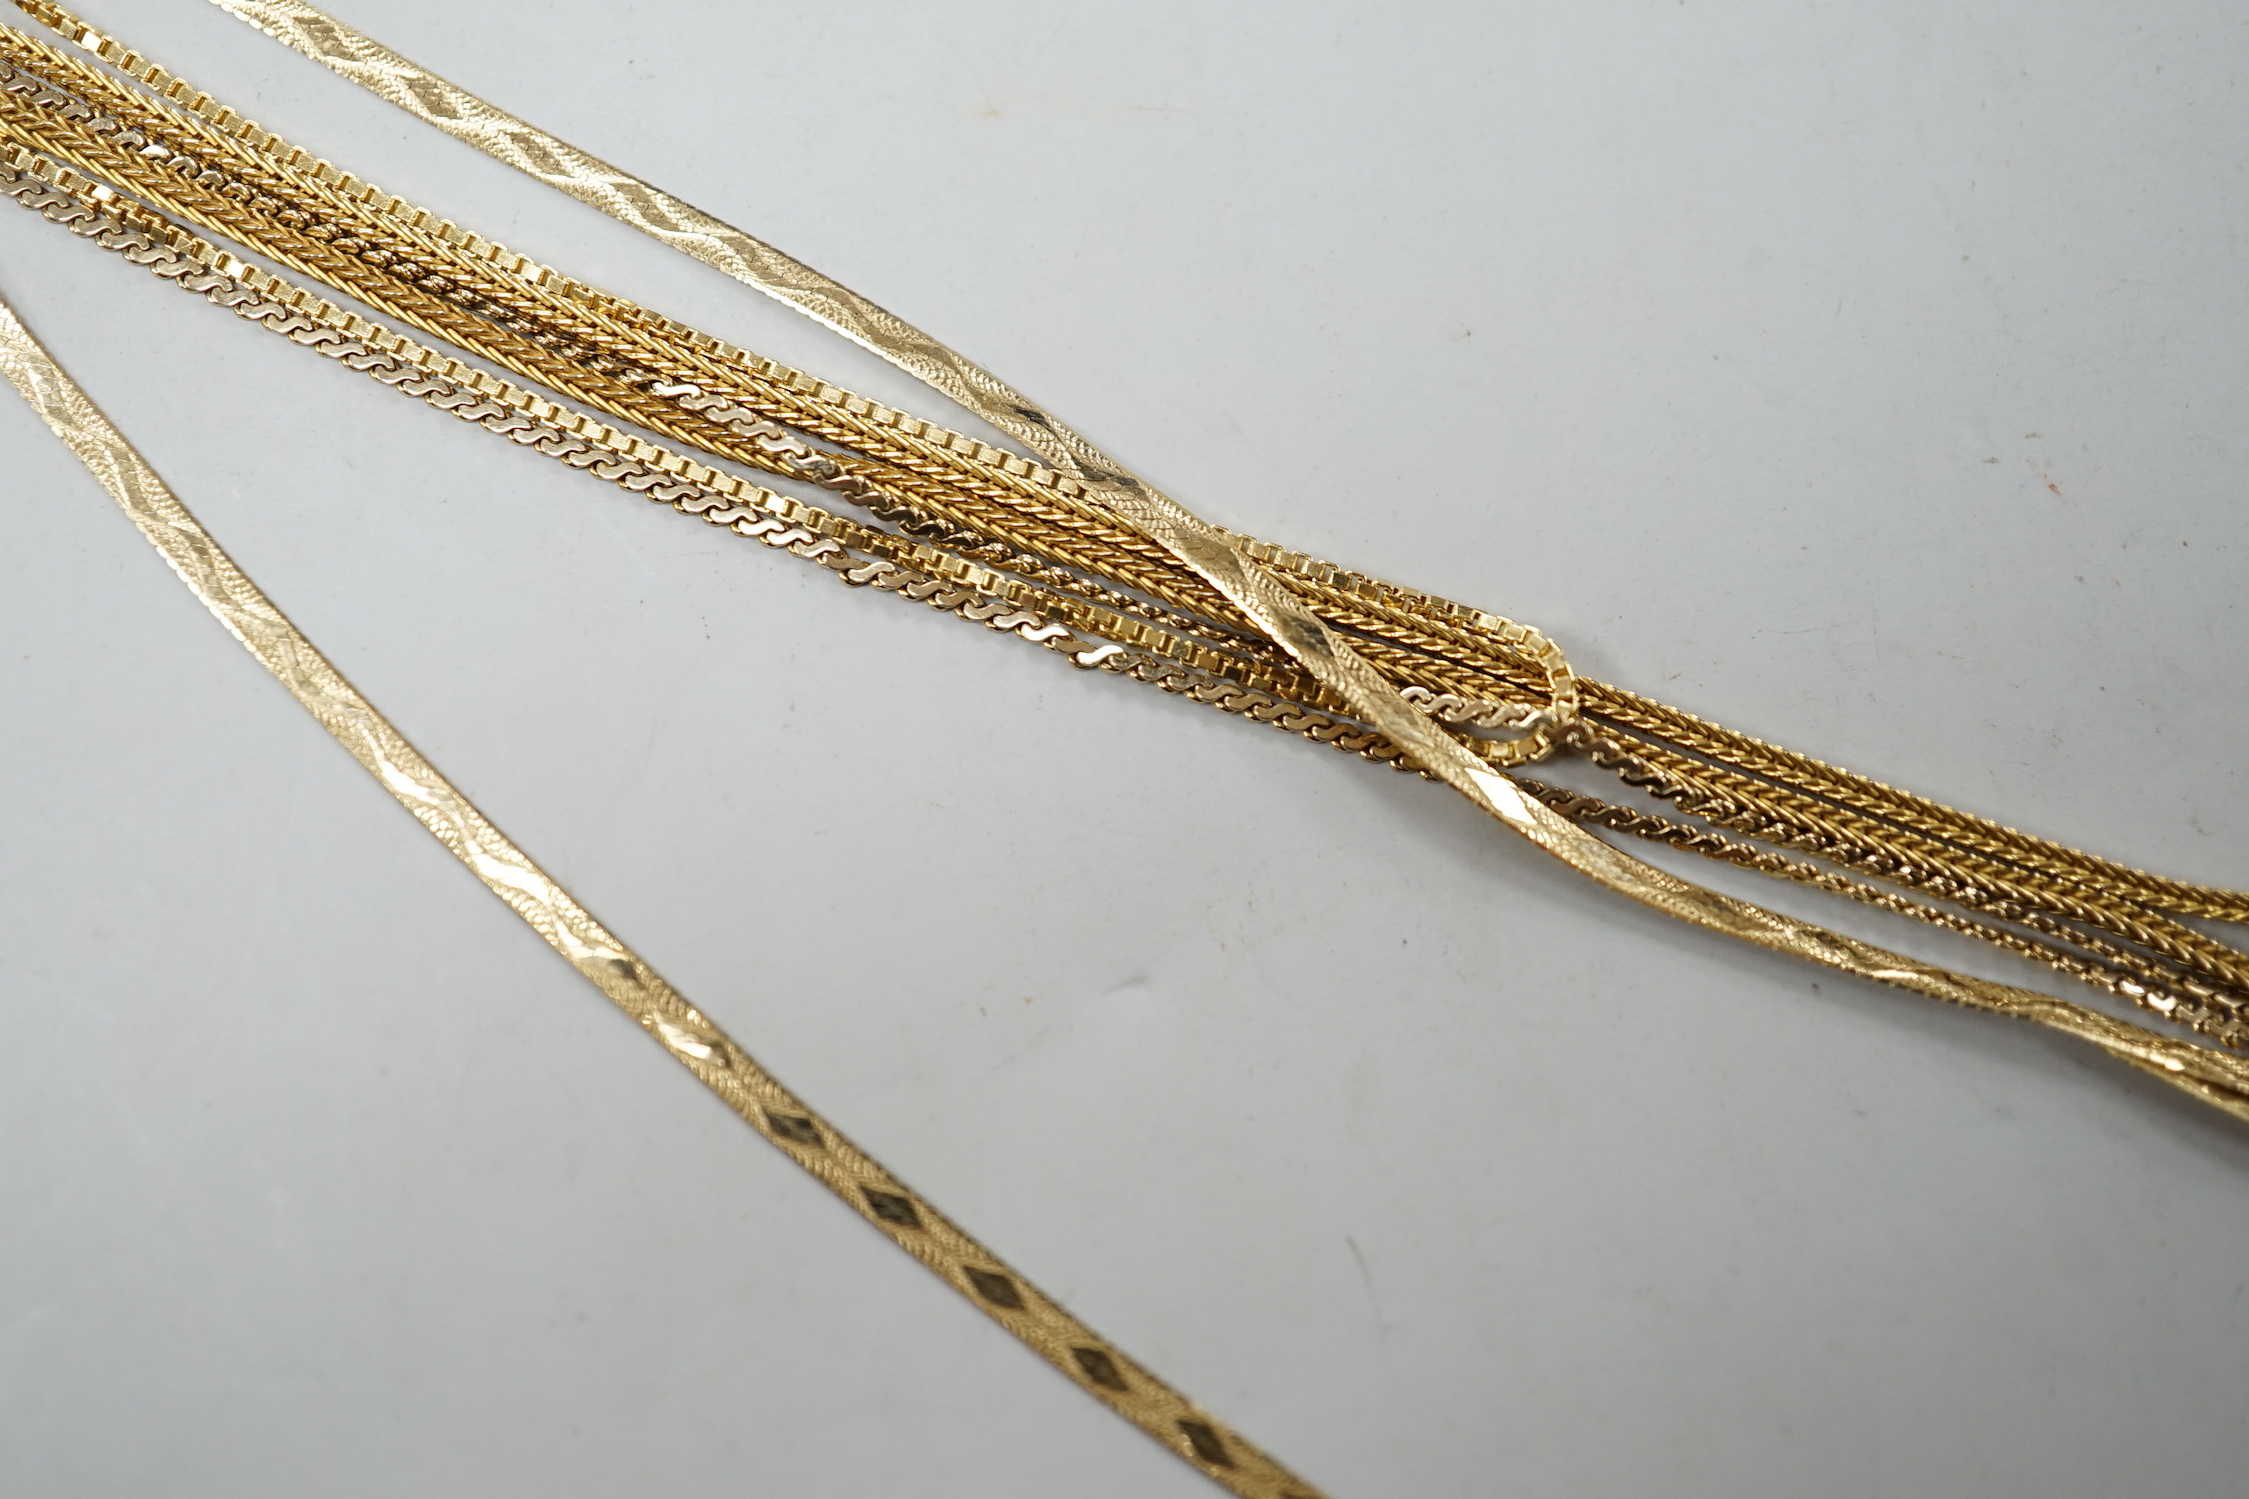 Two modern 9ct gold chains, longest 50cm, 6.3 grams, a 14k chain, 46cm, 2.6 grams and a 750 yellow metal chain, 38cm, 3.5 grams.